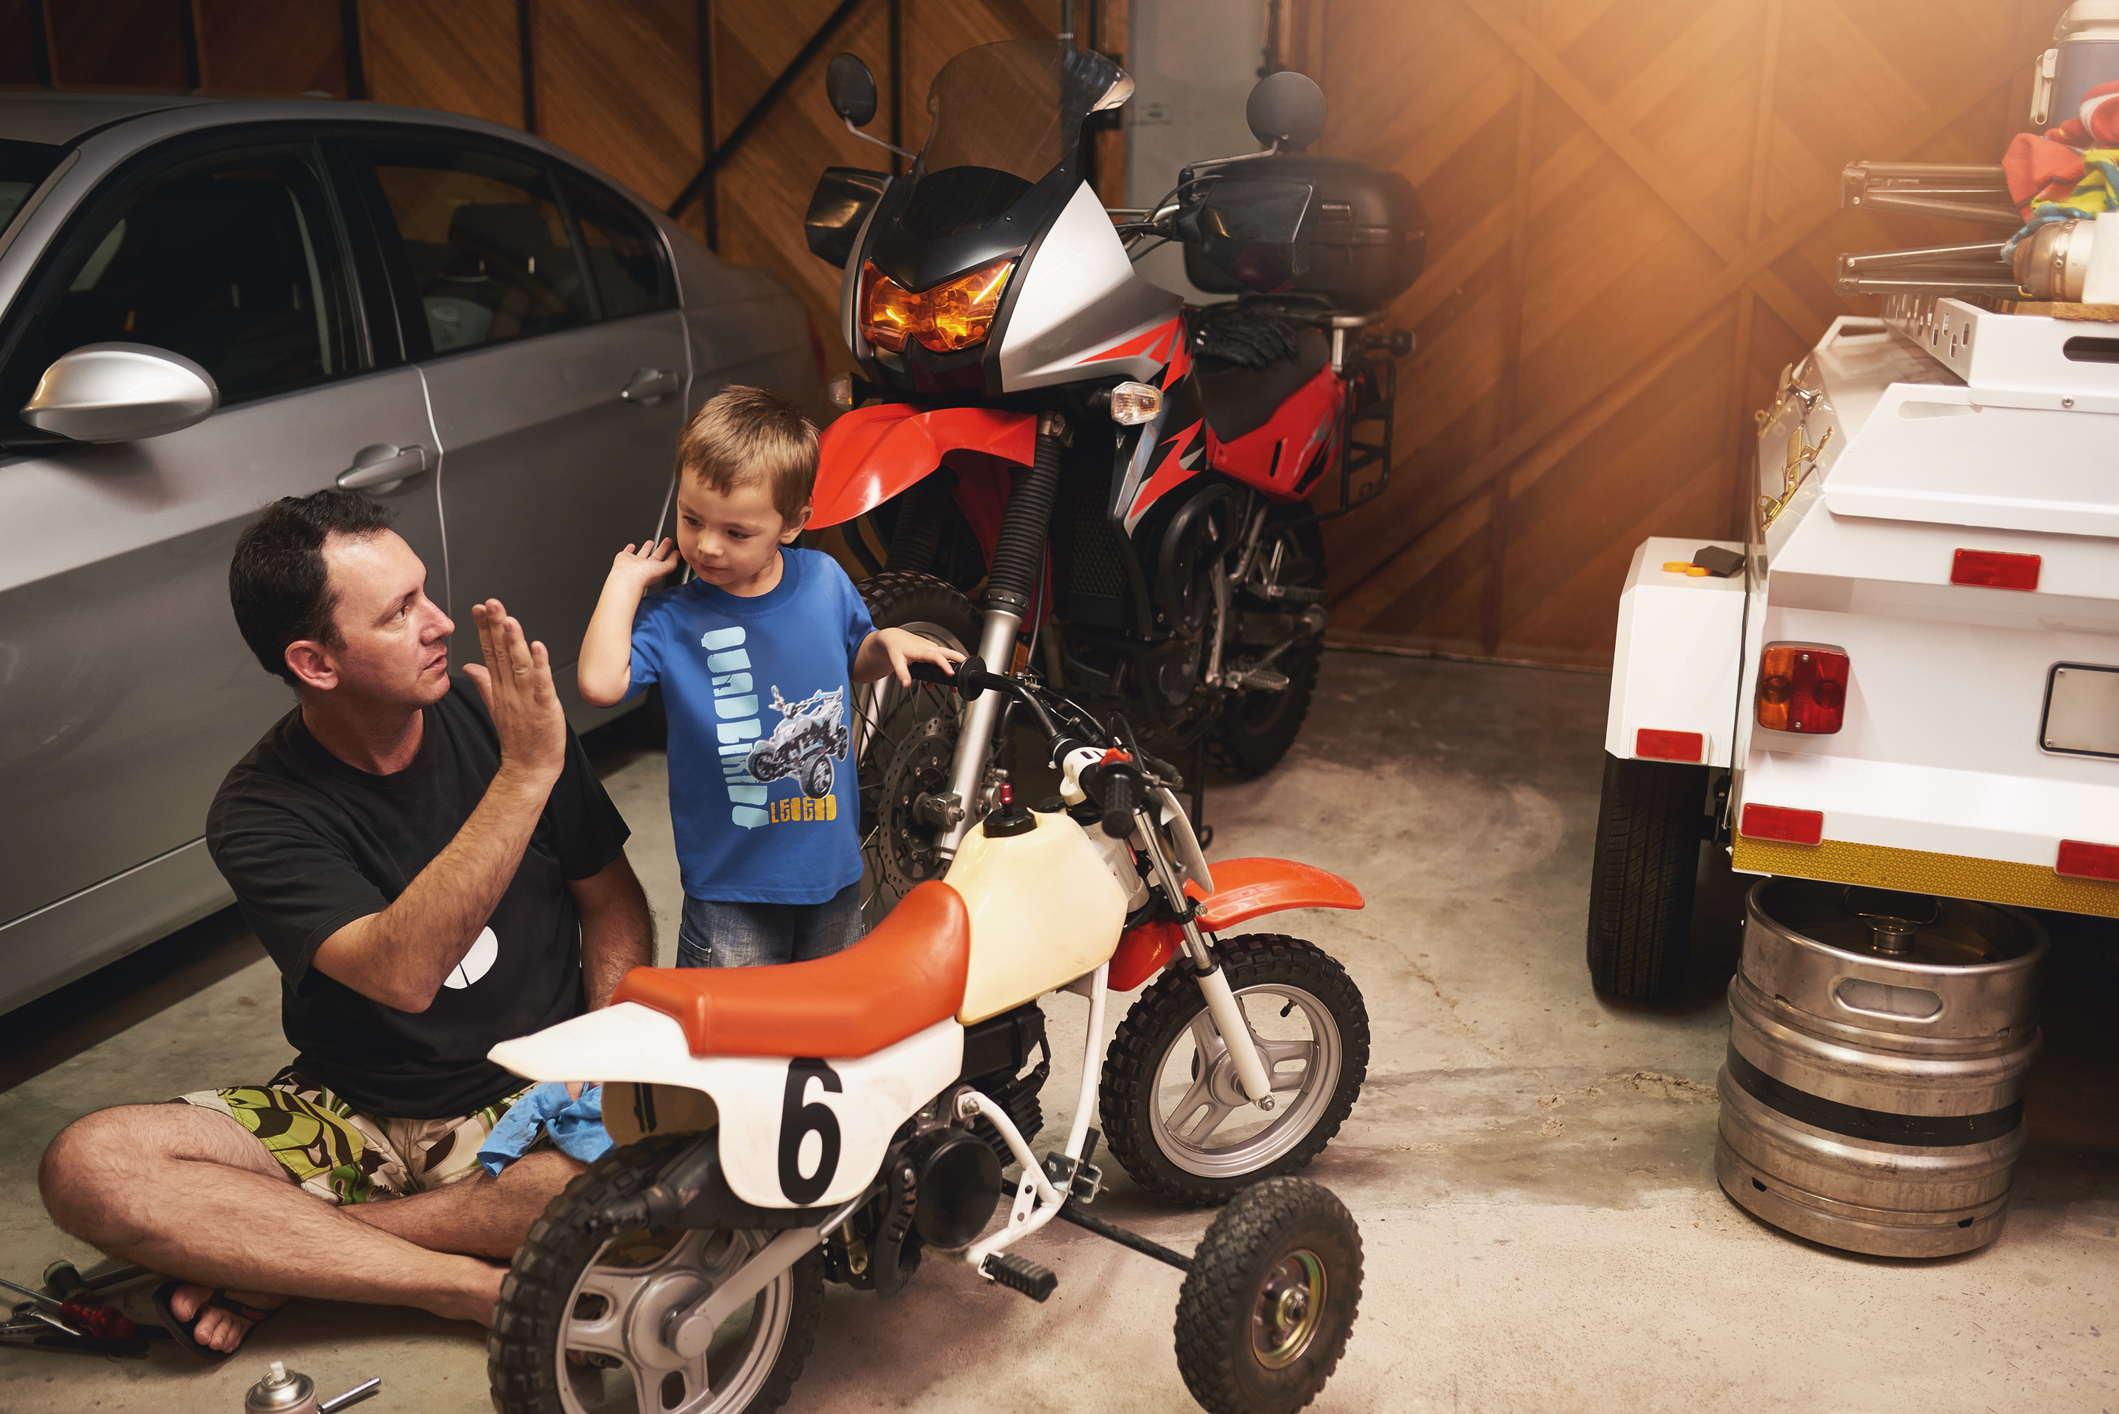 Father and son working on motorcycle